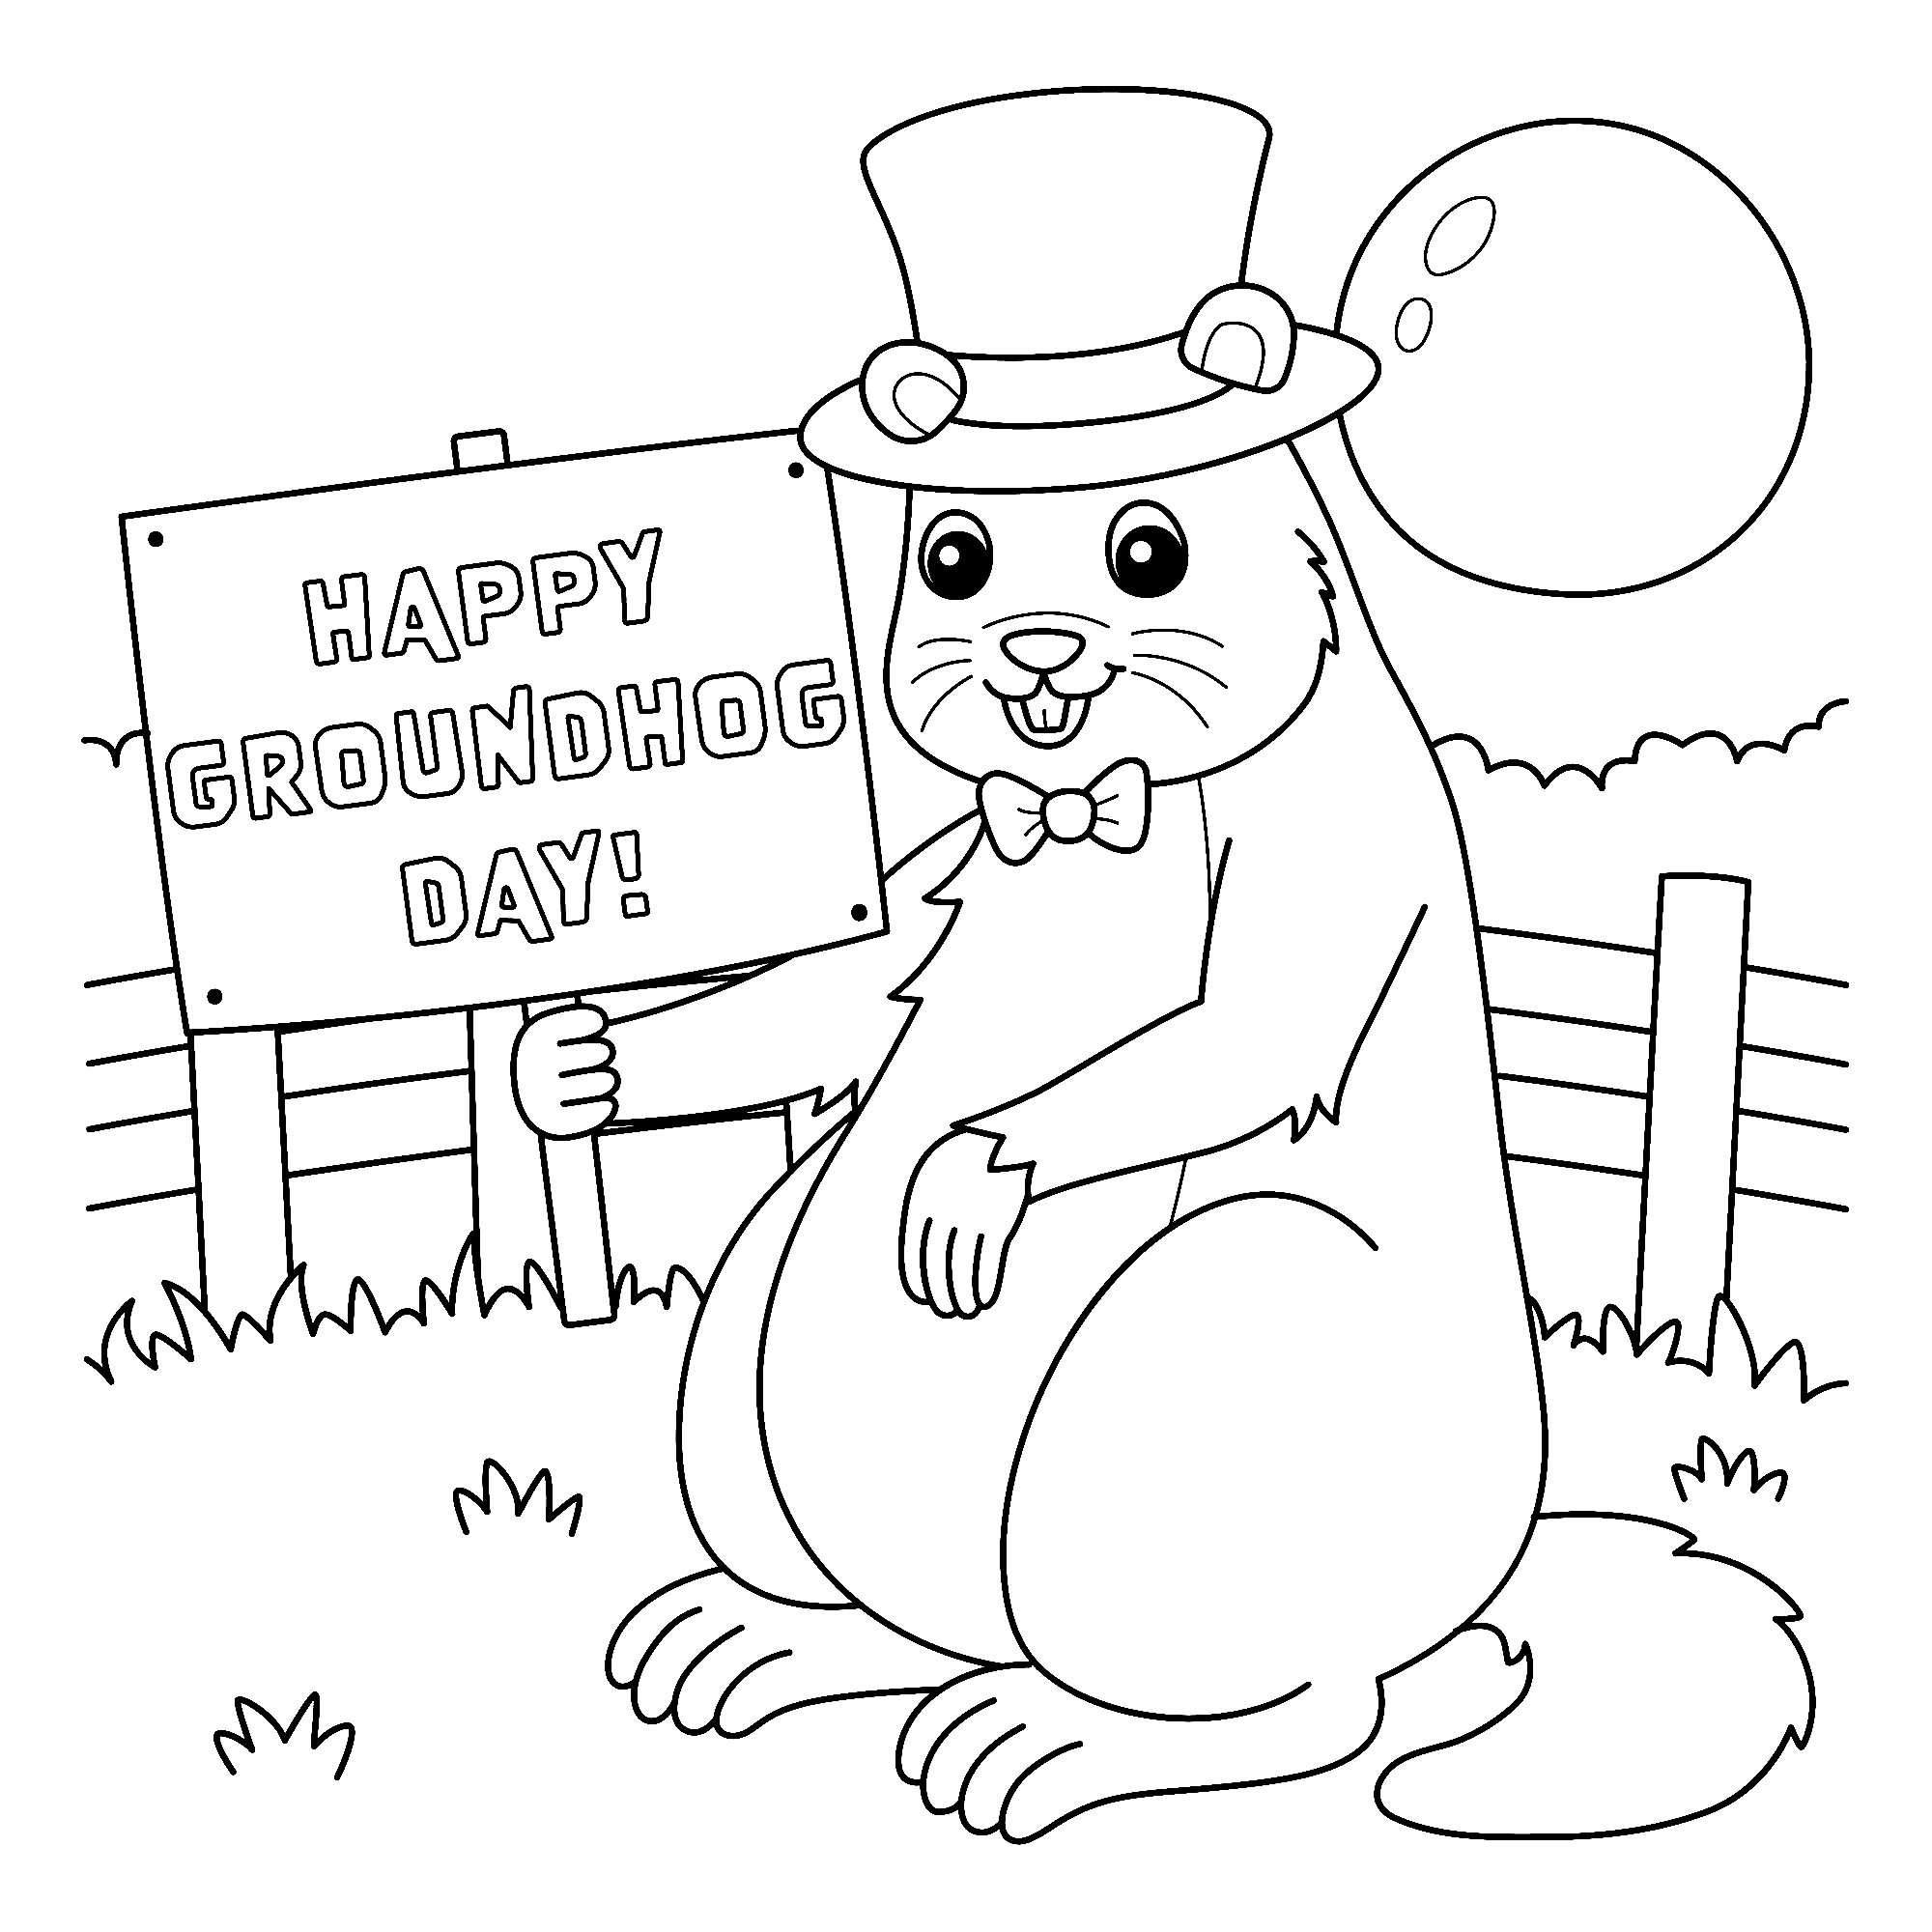 Happy Groundhog Day Image Coloring Page